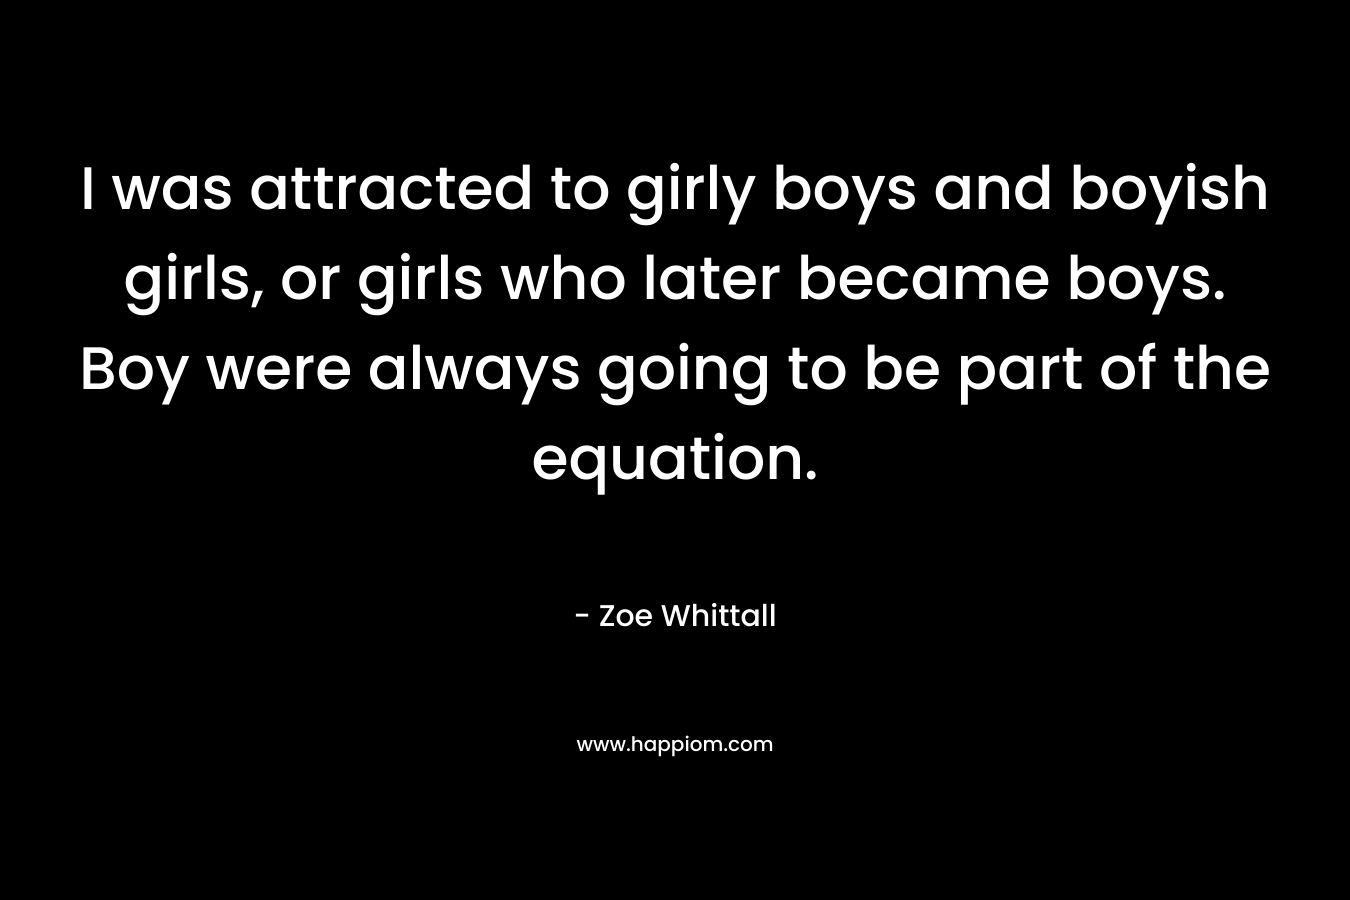 I was attracted to girly boys and boyish girls, or girls who later became boys. Boy were always going to be part of the equation.